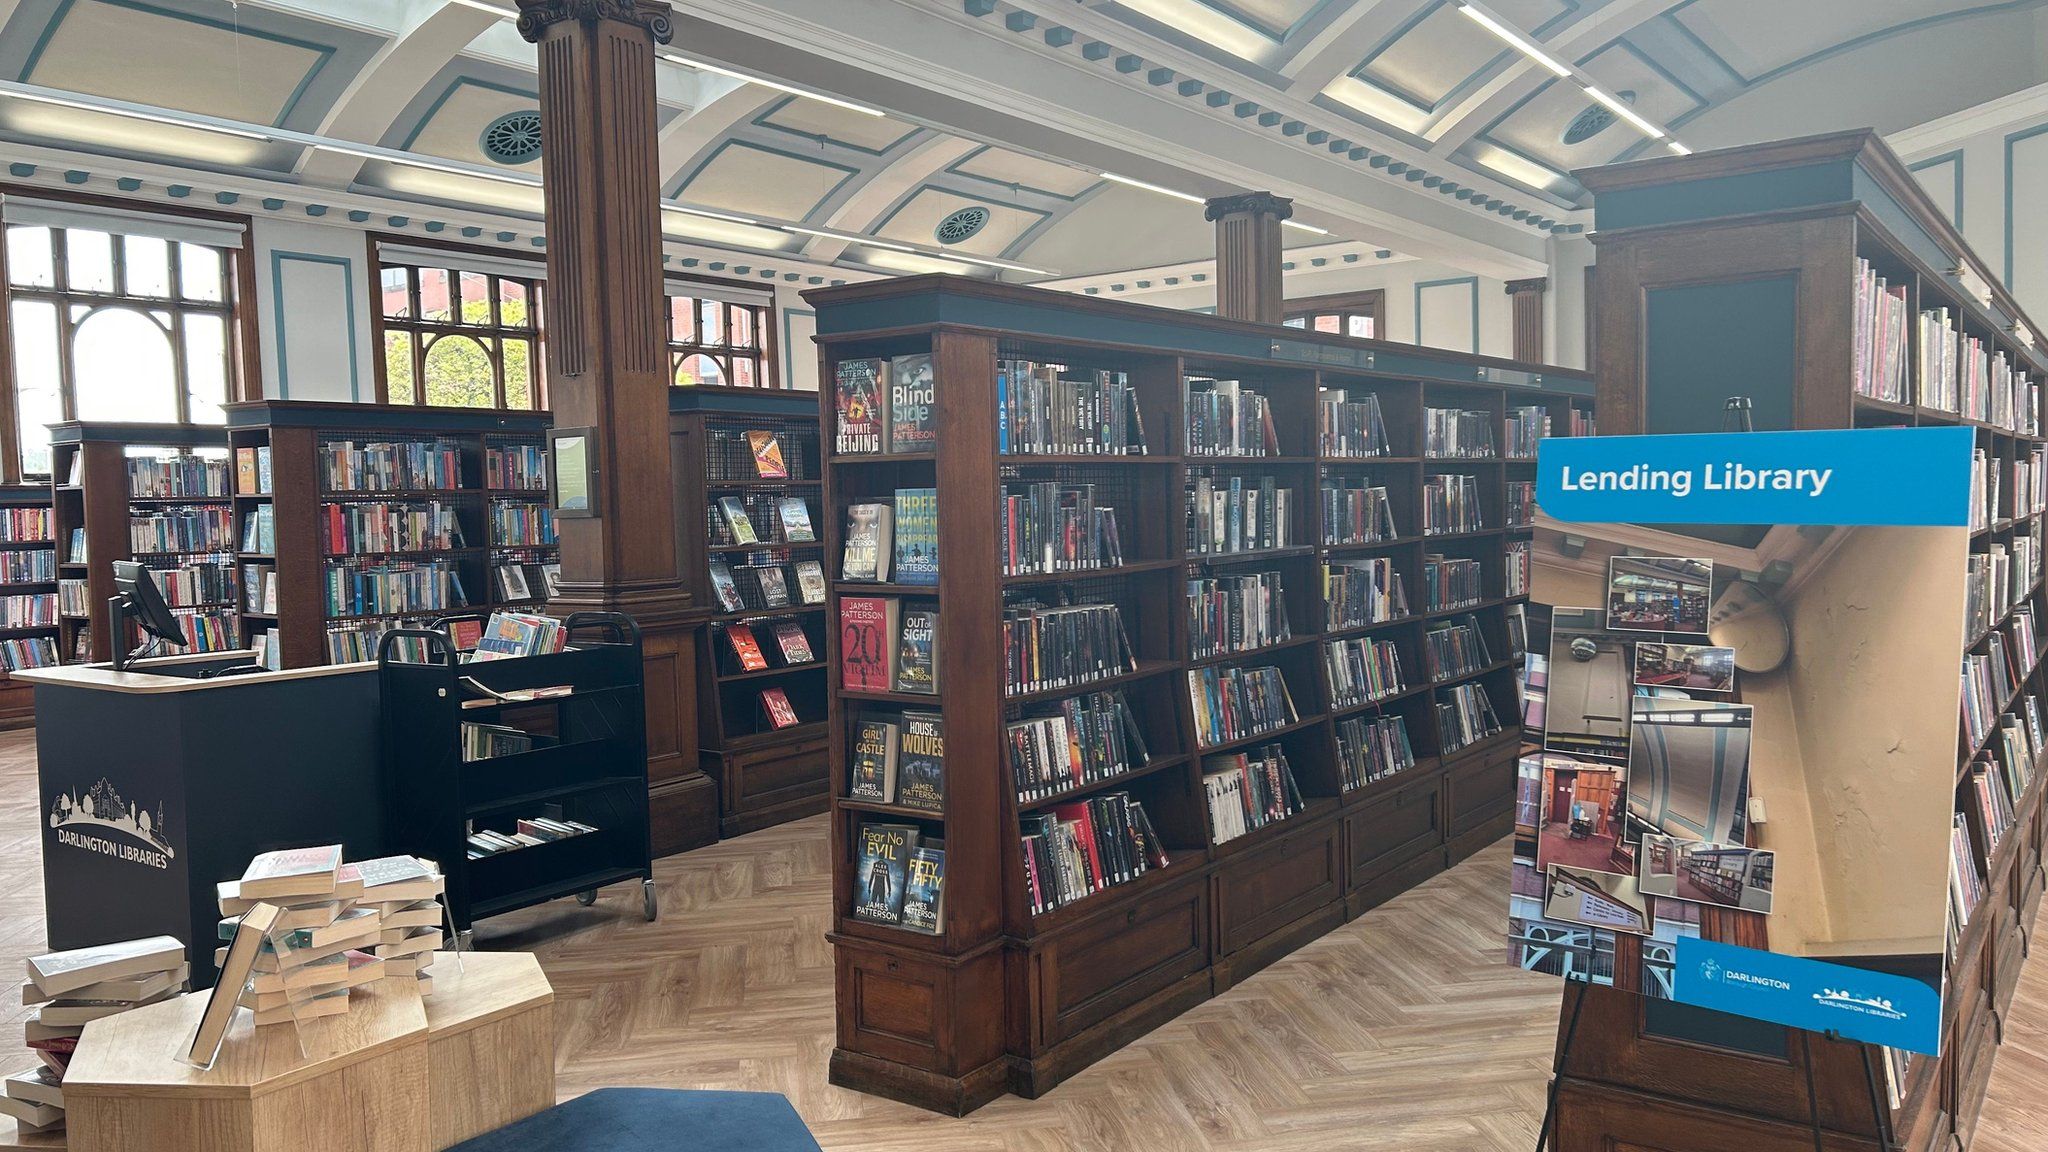 Inside the library with shelves of books